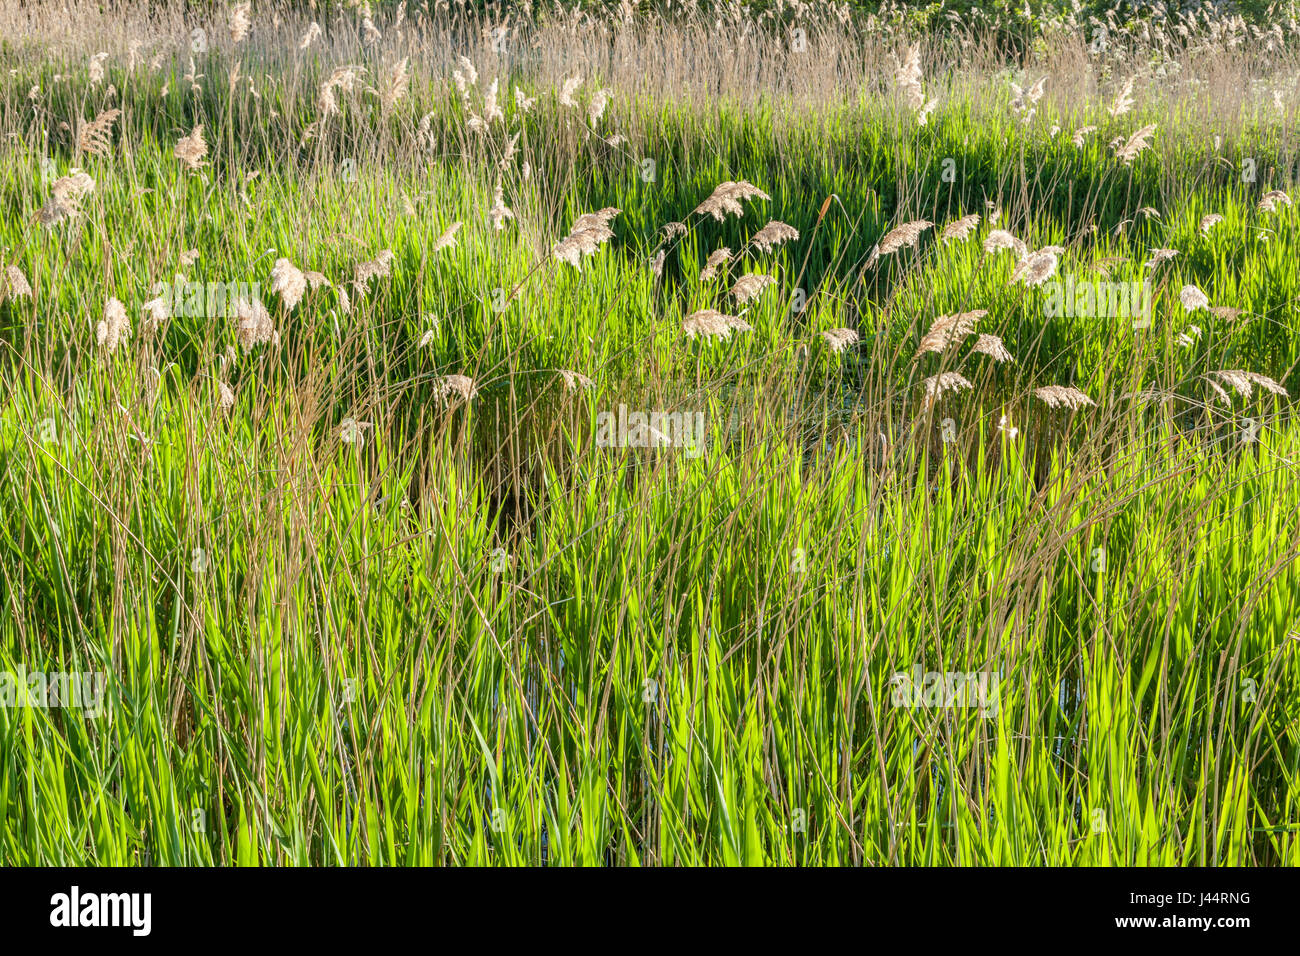 Reeds, rushes and grasses growing in the disused Grantham Canal, West Bridgford, Nottinghamshire, England, UK Stock Photo